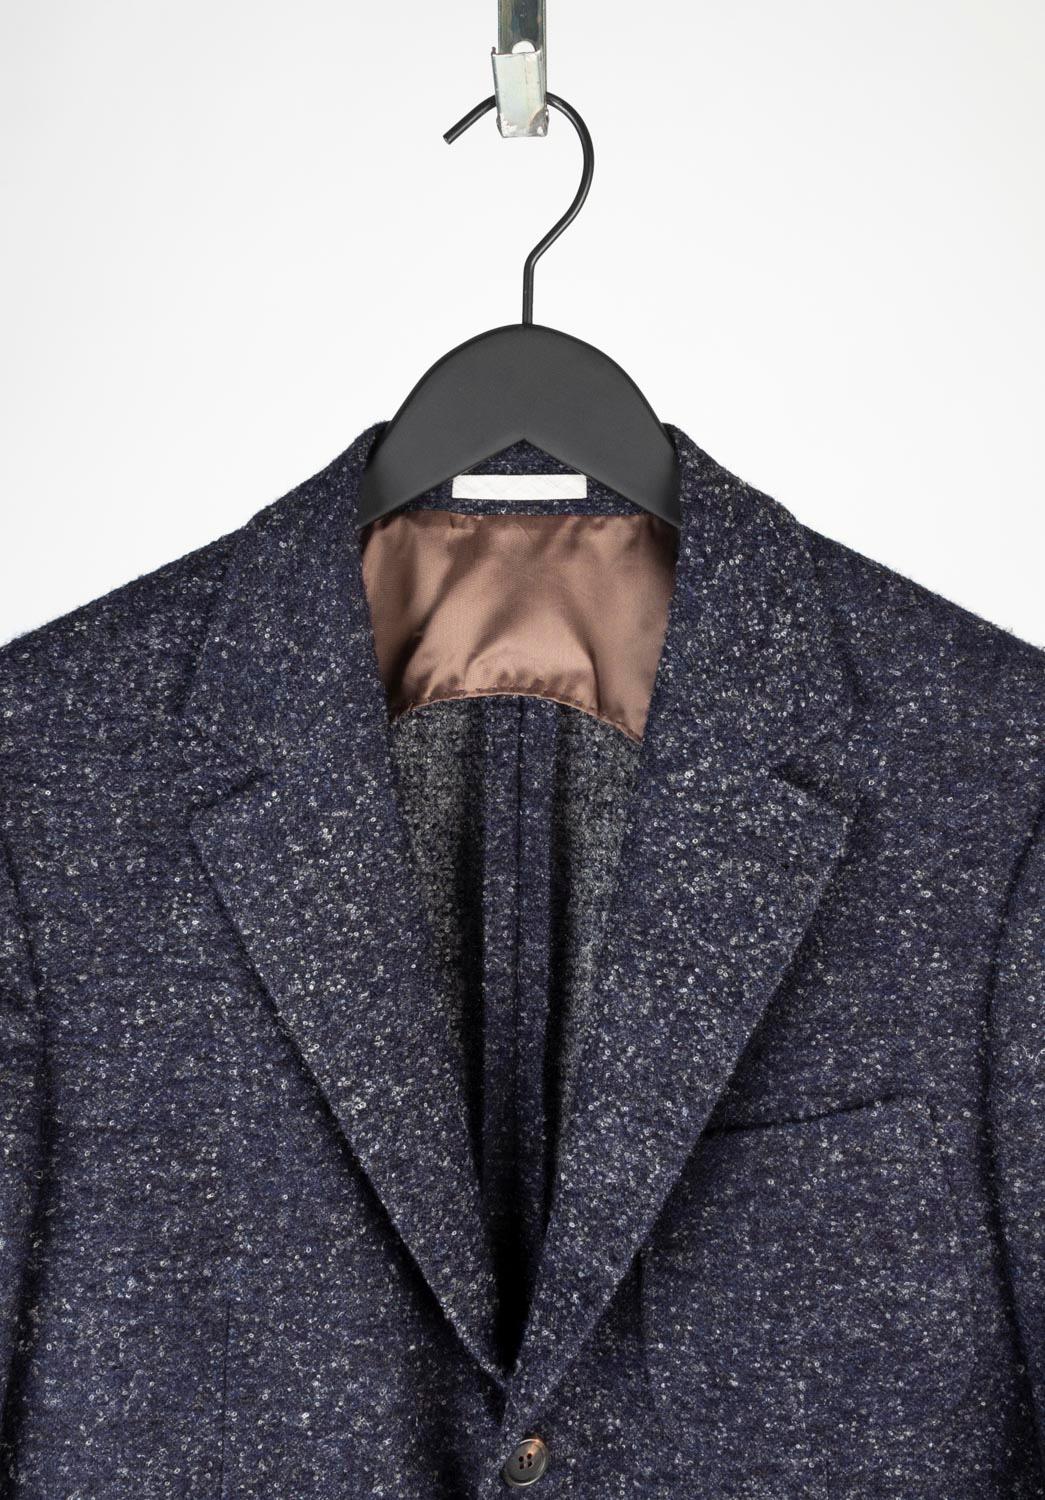 100% genuine Brunello Cucinelli blue grey blazer, S644 
Color: blue/Grey
(An actual color may a bit vary due to individual computer screen interpretation)
Material: 100% wool
Tag size: ITA48, runs Medium
This blazer is great quality item. Rate 9 of